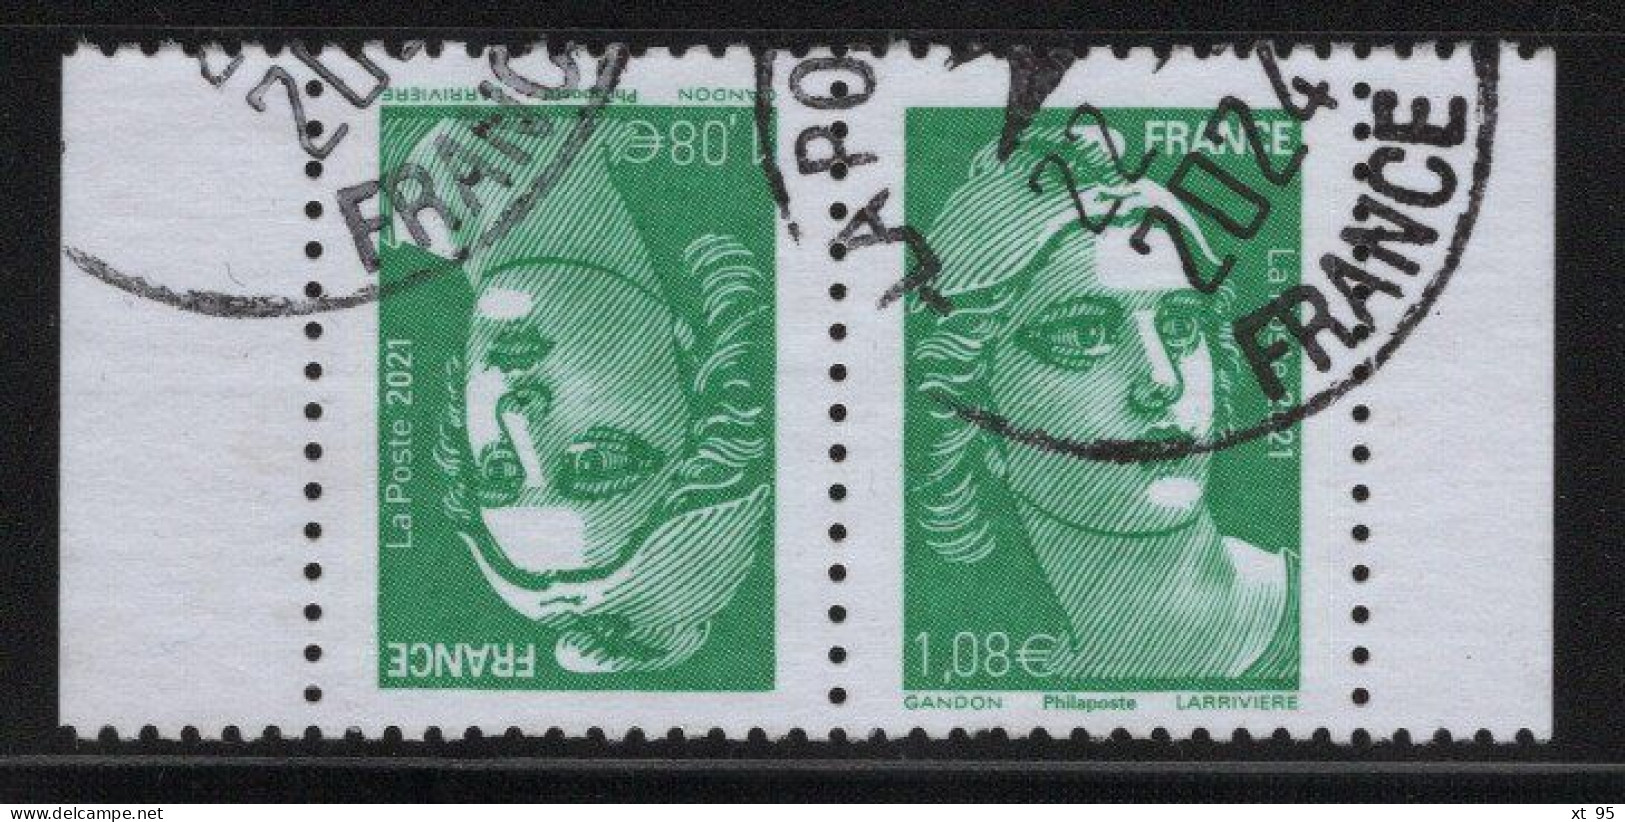 France - N°5496a - Marianne De Gandon - Paire Tete Beche - Oblitere - Used Stamps